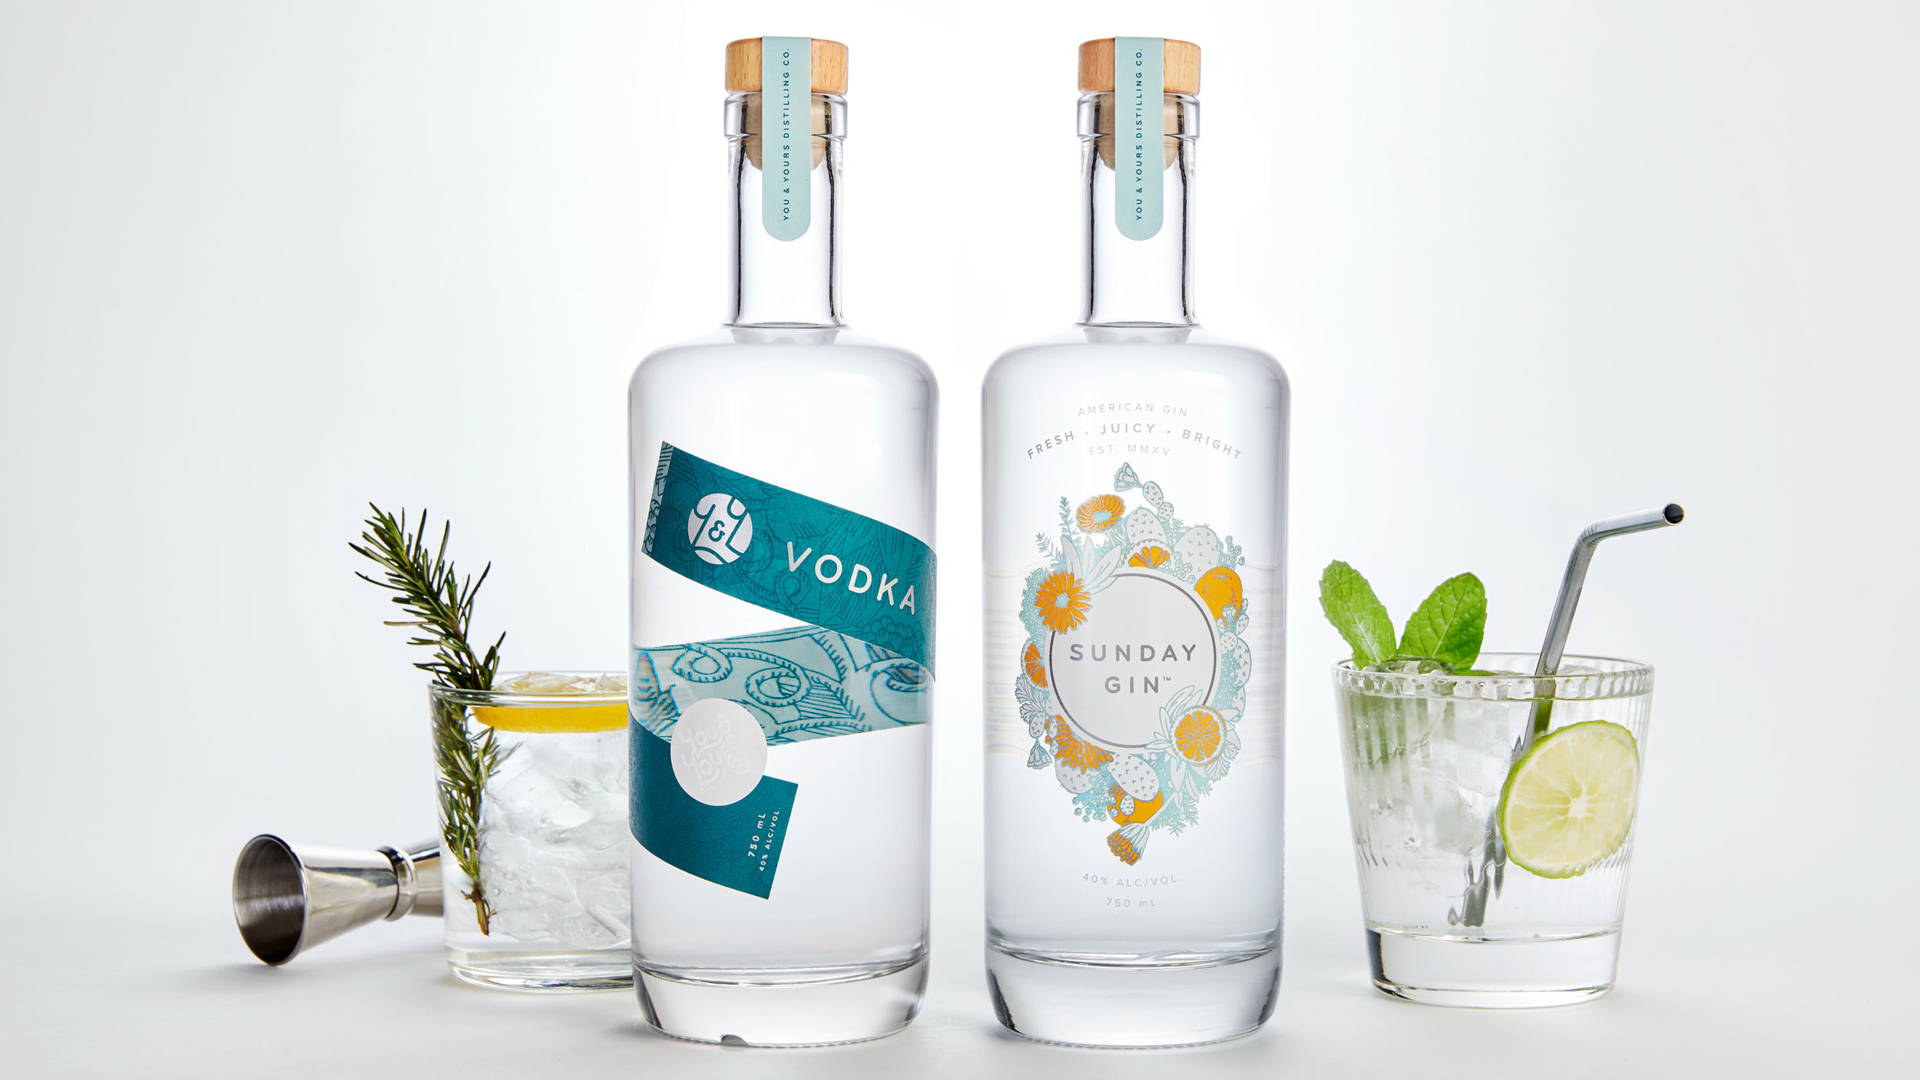 Featured image for These Spirits From a California Distillery Come With a Fresh Modern Look